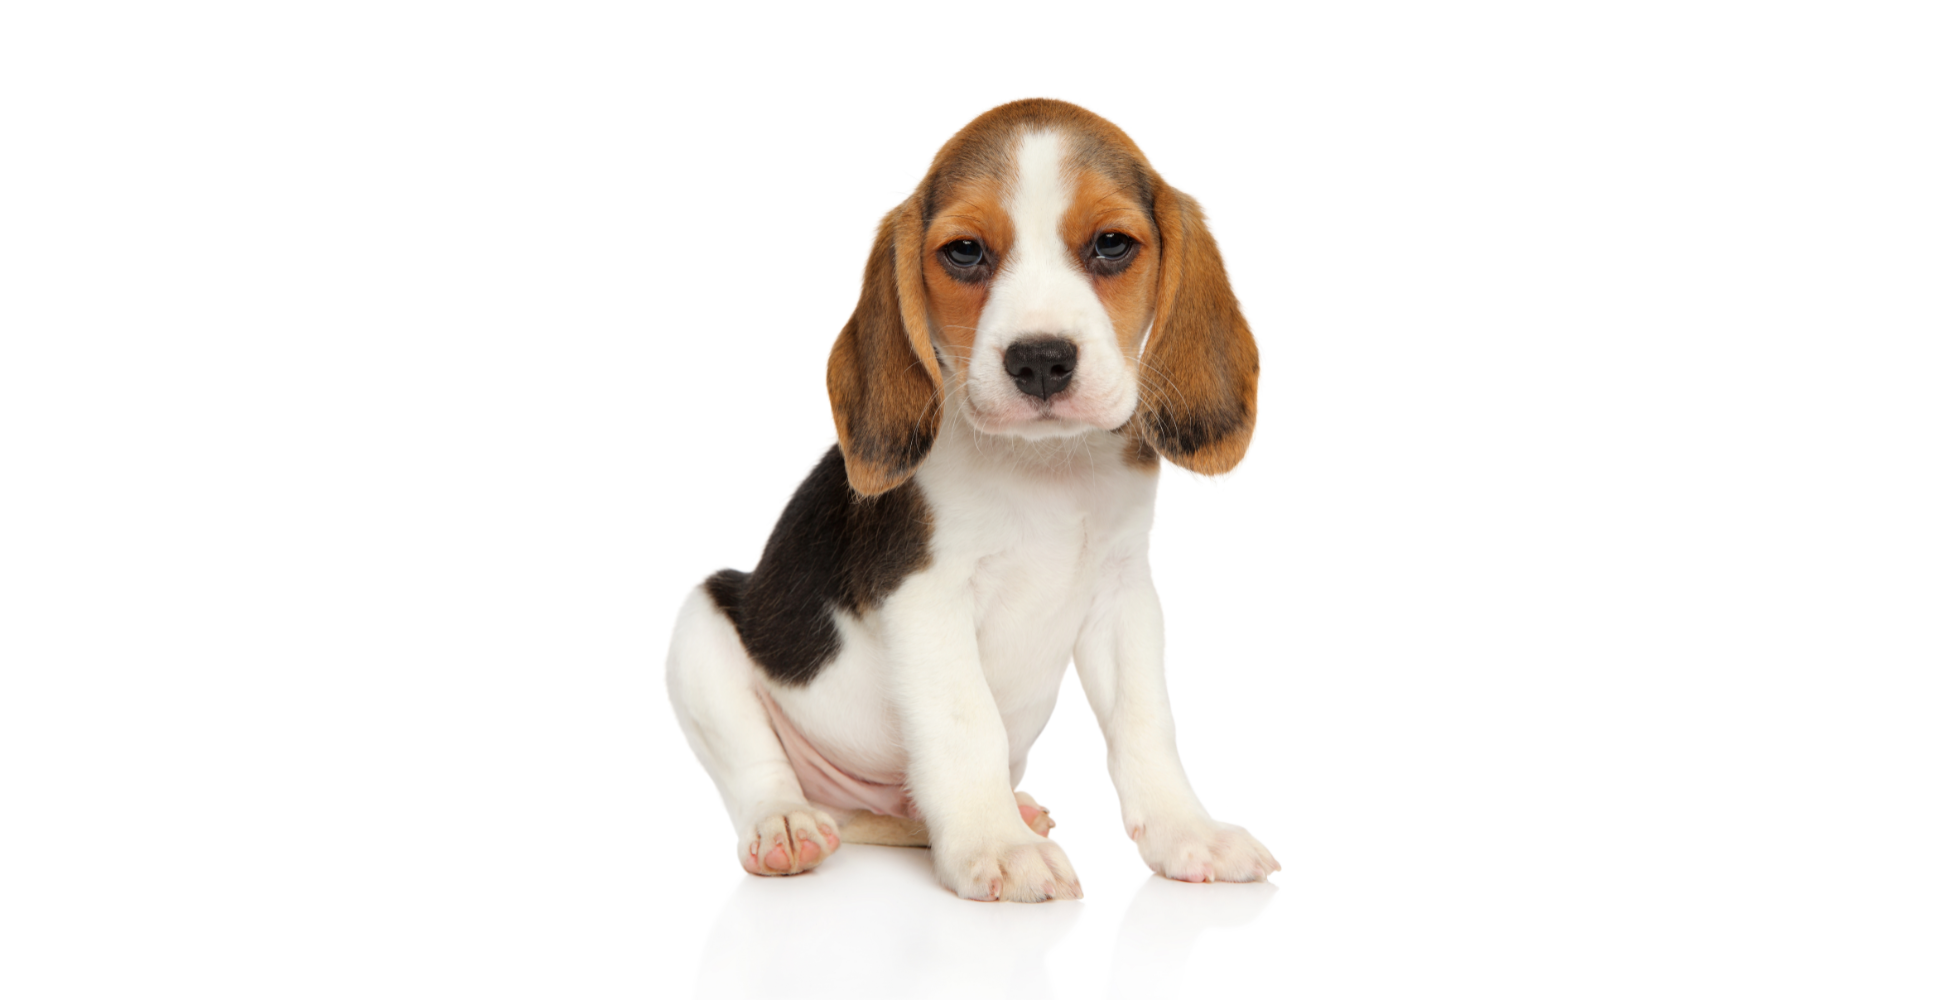 A cute Beagle puppy, one of the best dogs for first time owners due to their friendly and easy-going nature.